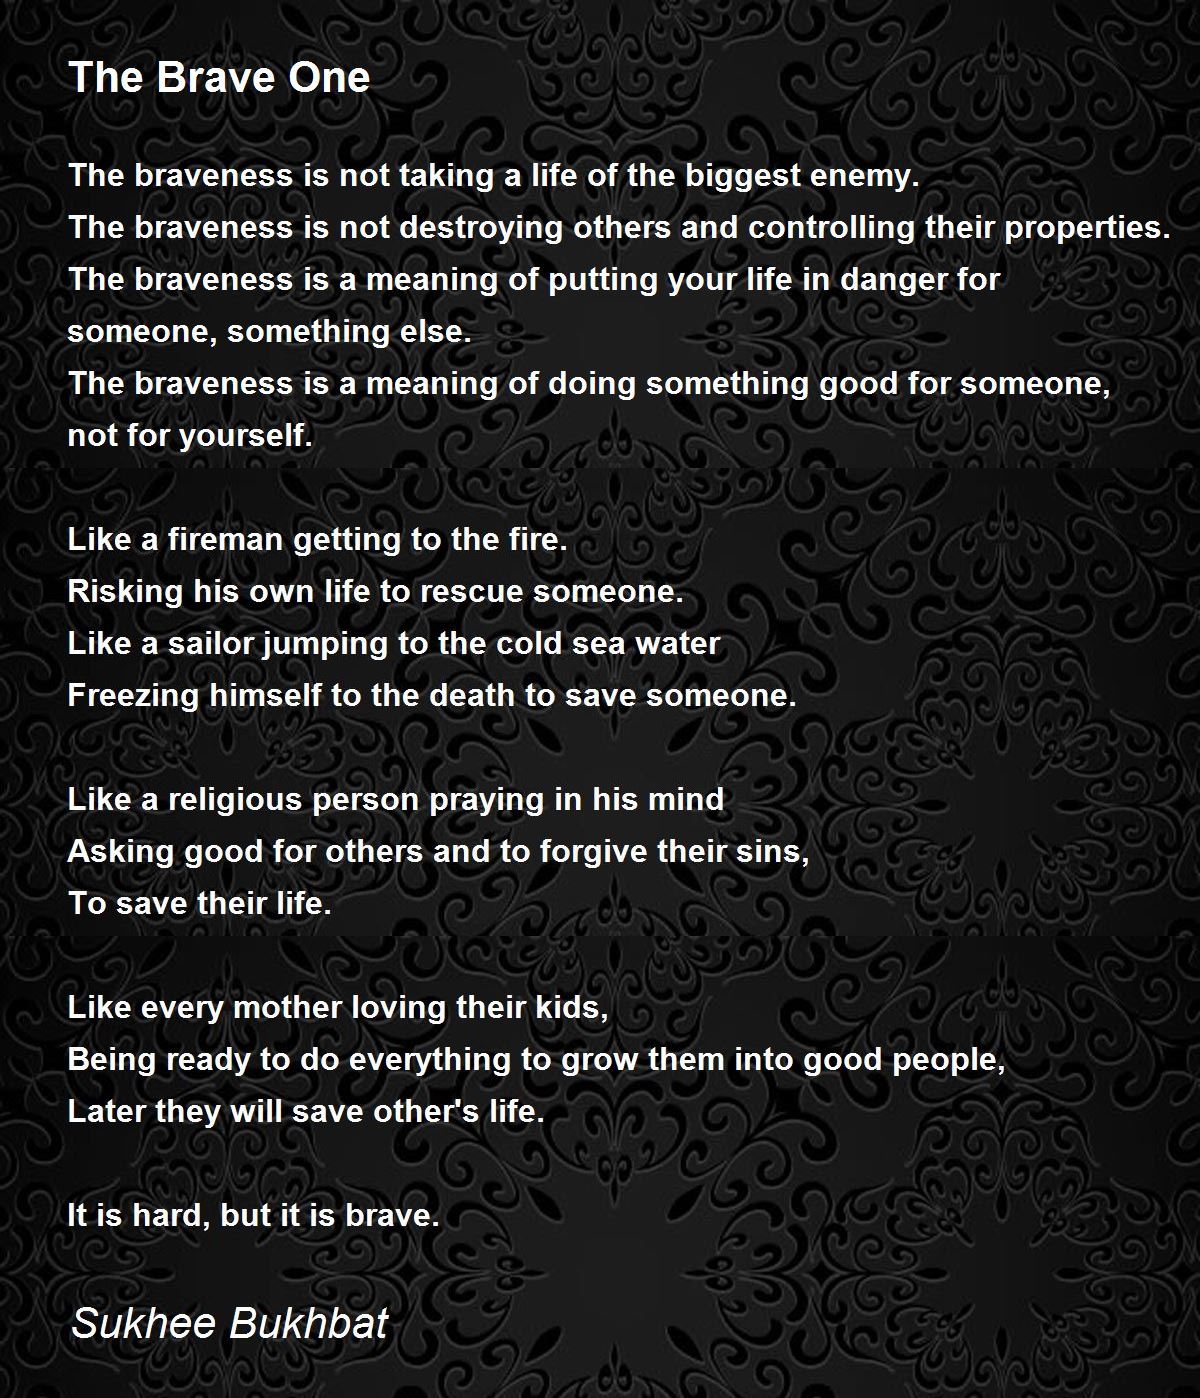 The Brave One - The Brave One Poem by Sukhee Bukhbat